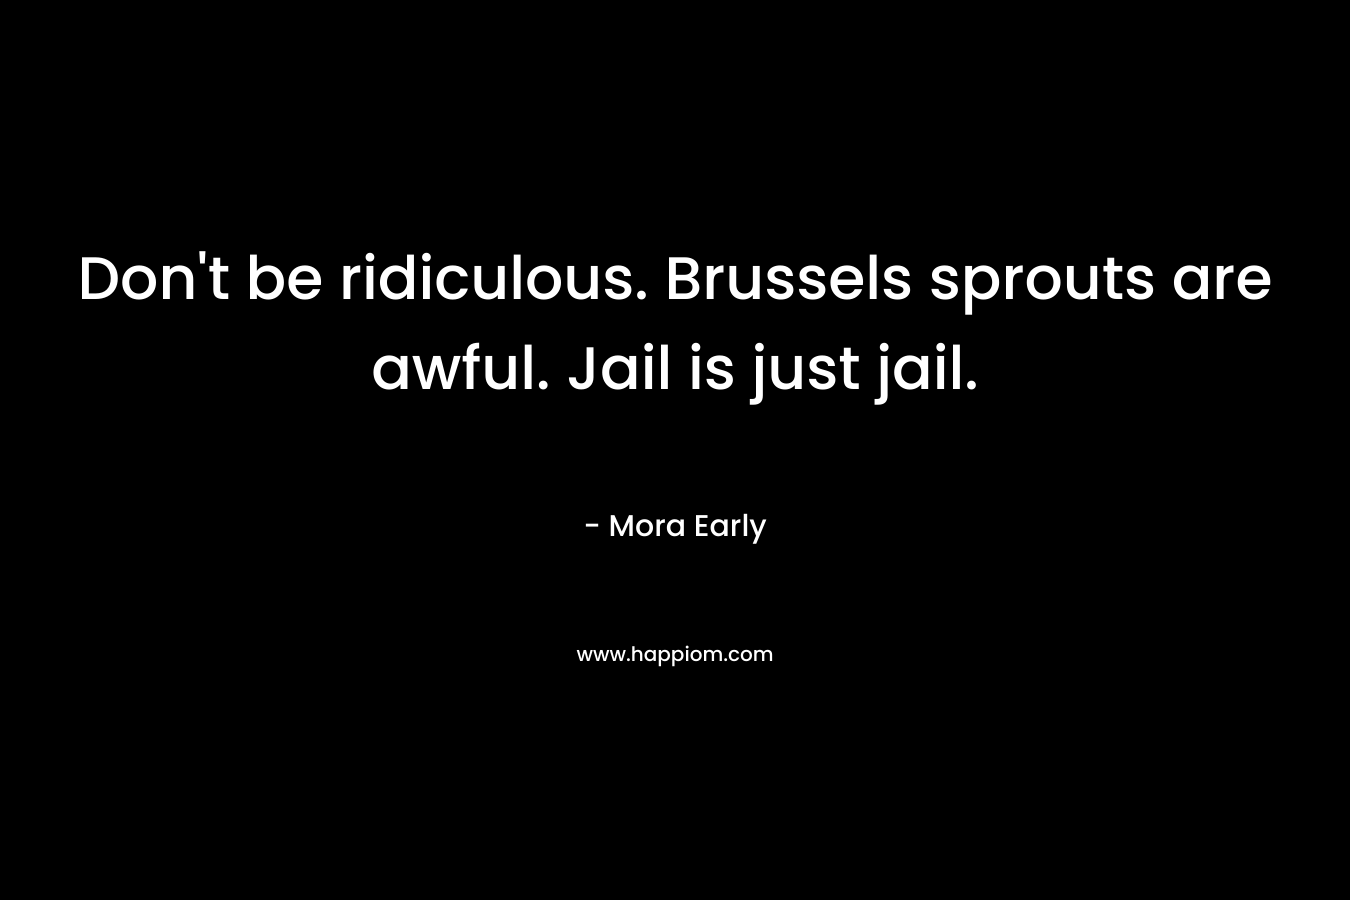 Don't be ridiculous. Brussels sprouts are awful. Jail is just jail.